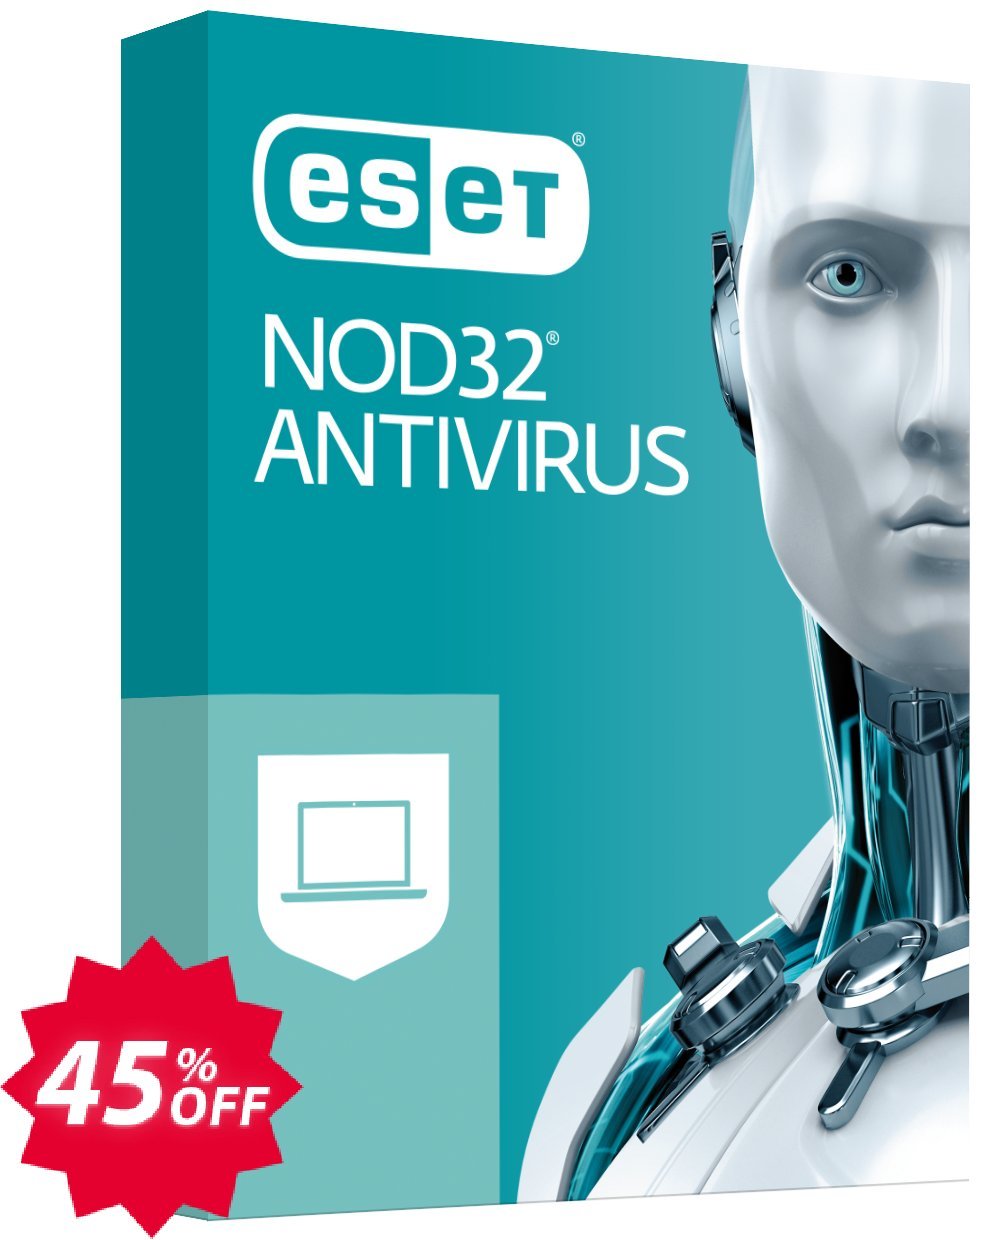 ESET NOD32 Antivirus -  Yearly 4 Devices Coupon code 45% discount 